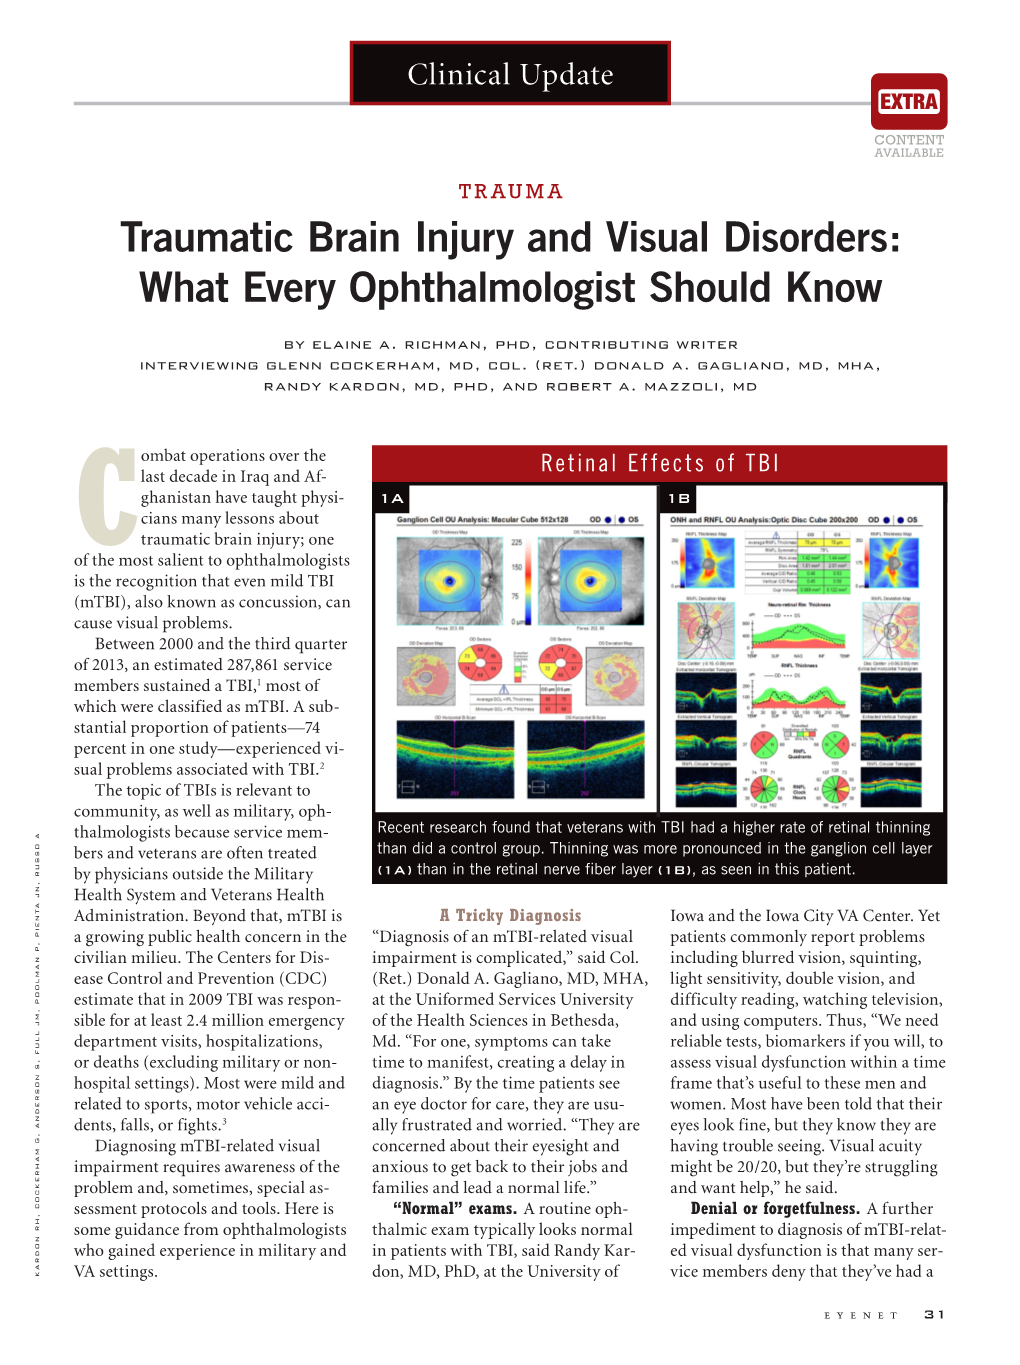 Traumatic Brain Injury and Visual Disorders: What Every Ophthalmologist Should Know